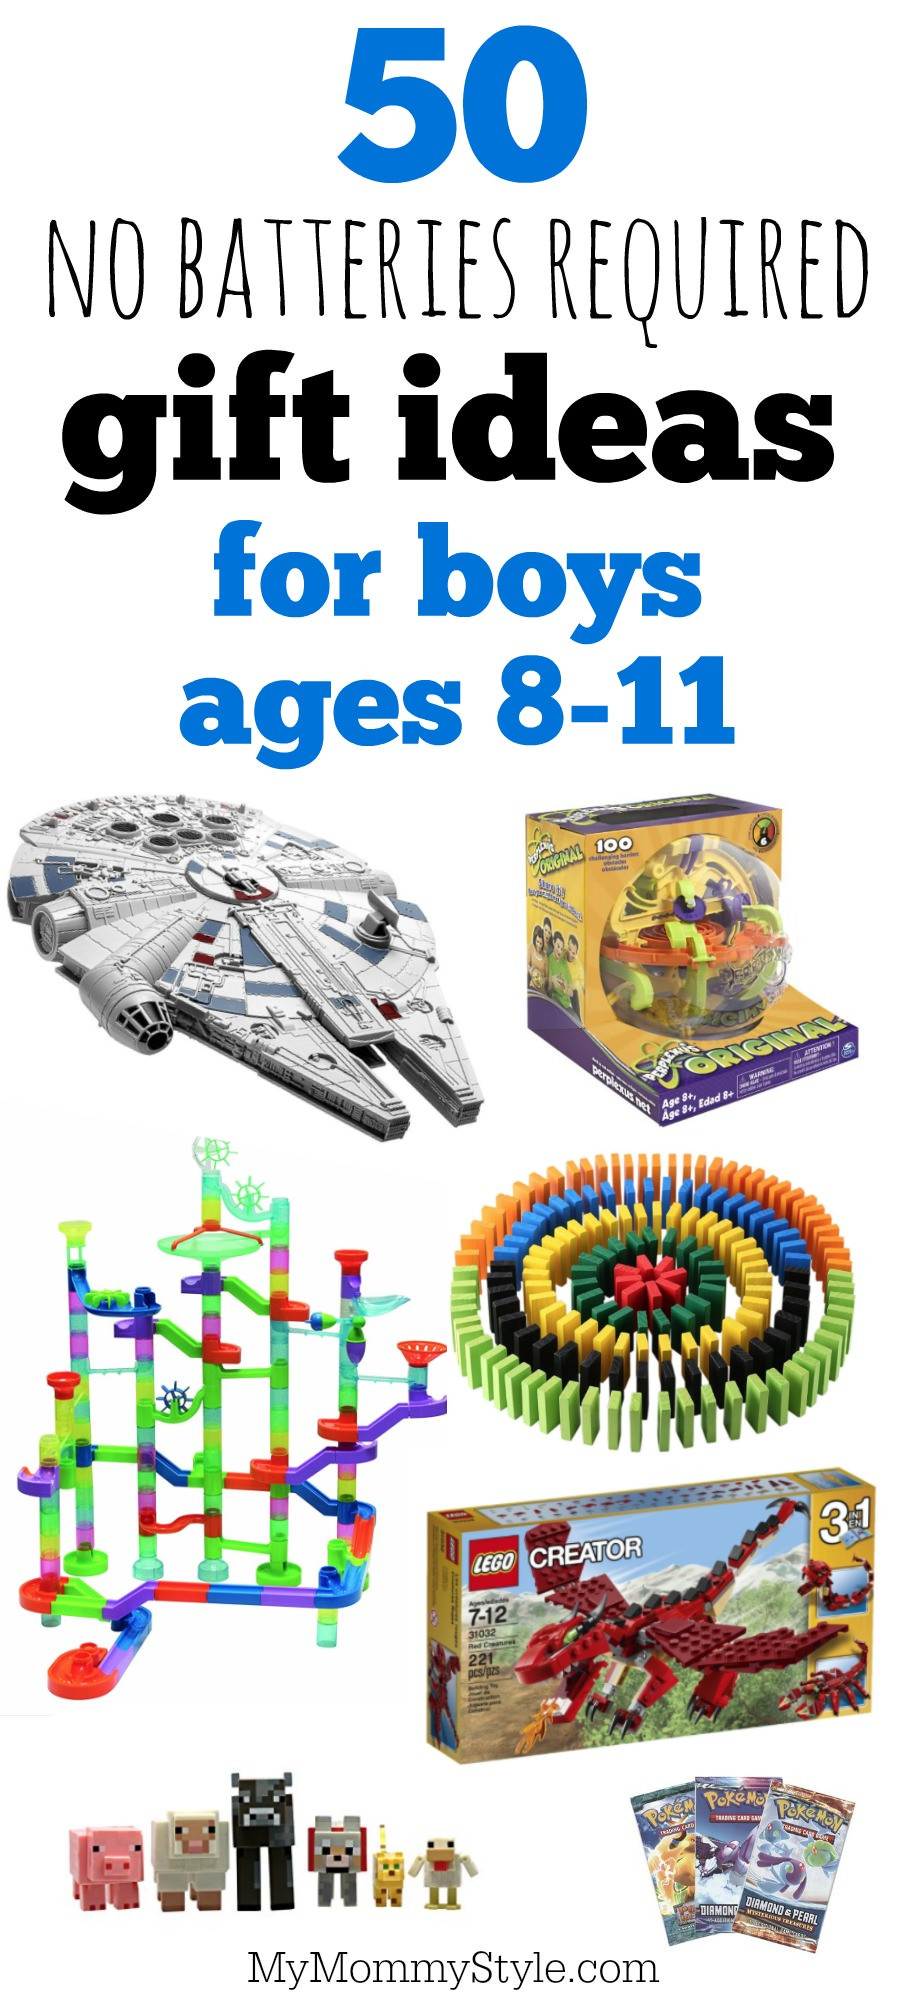 Boys Gift Ideas Age 8
 50 battery free t ideas for boys ages 8 11 My Mommy Style